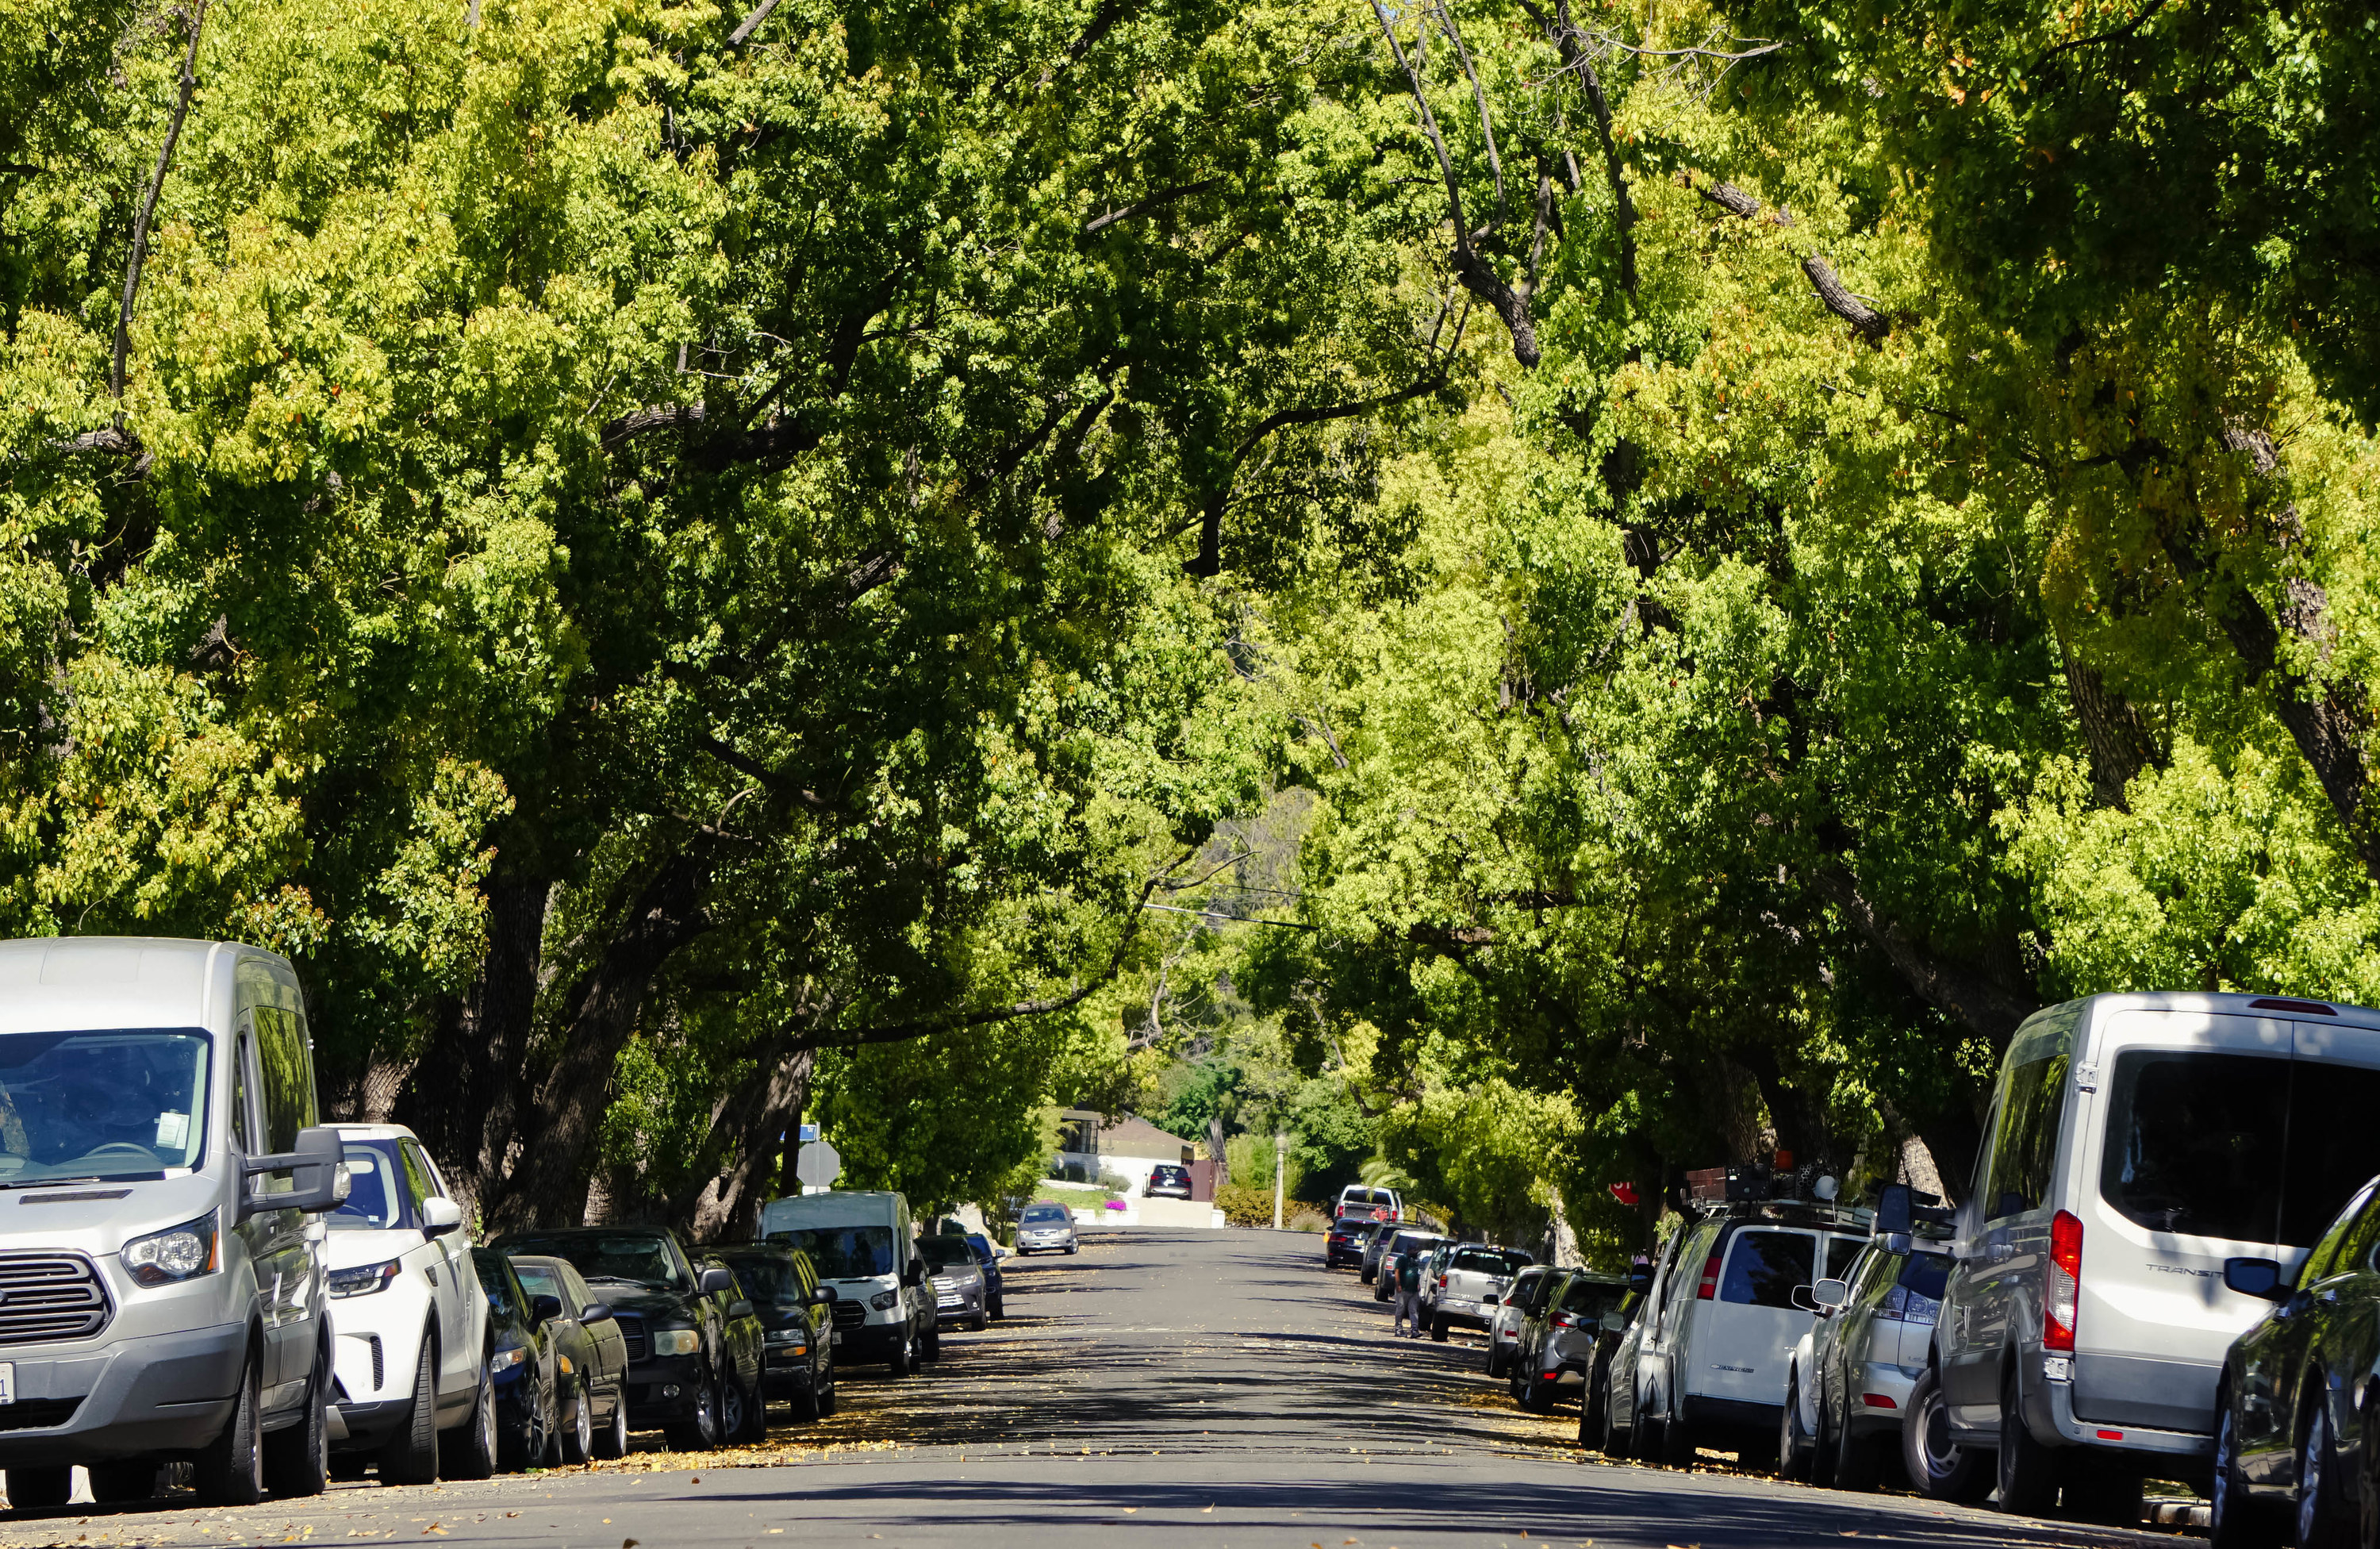 Camphor trees forming a bright green canopy over a residential street